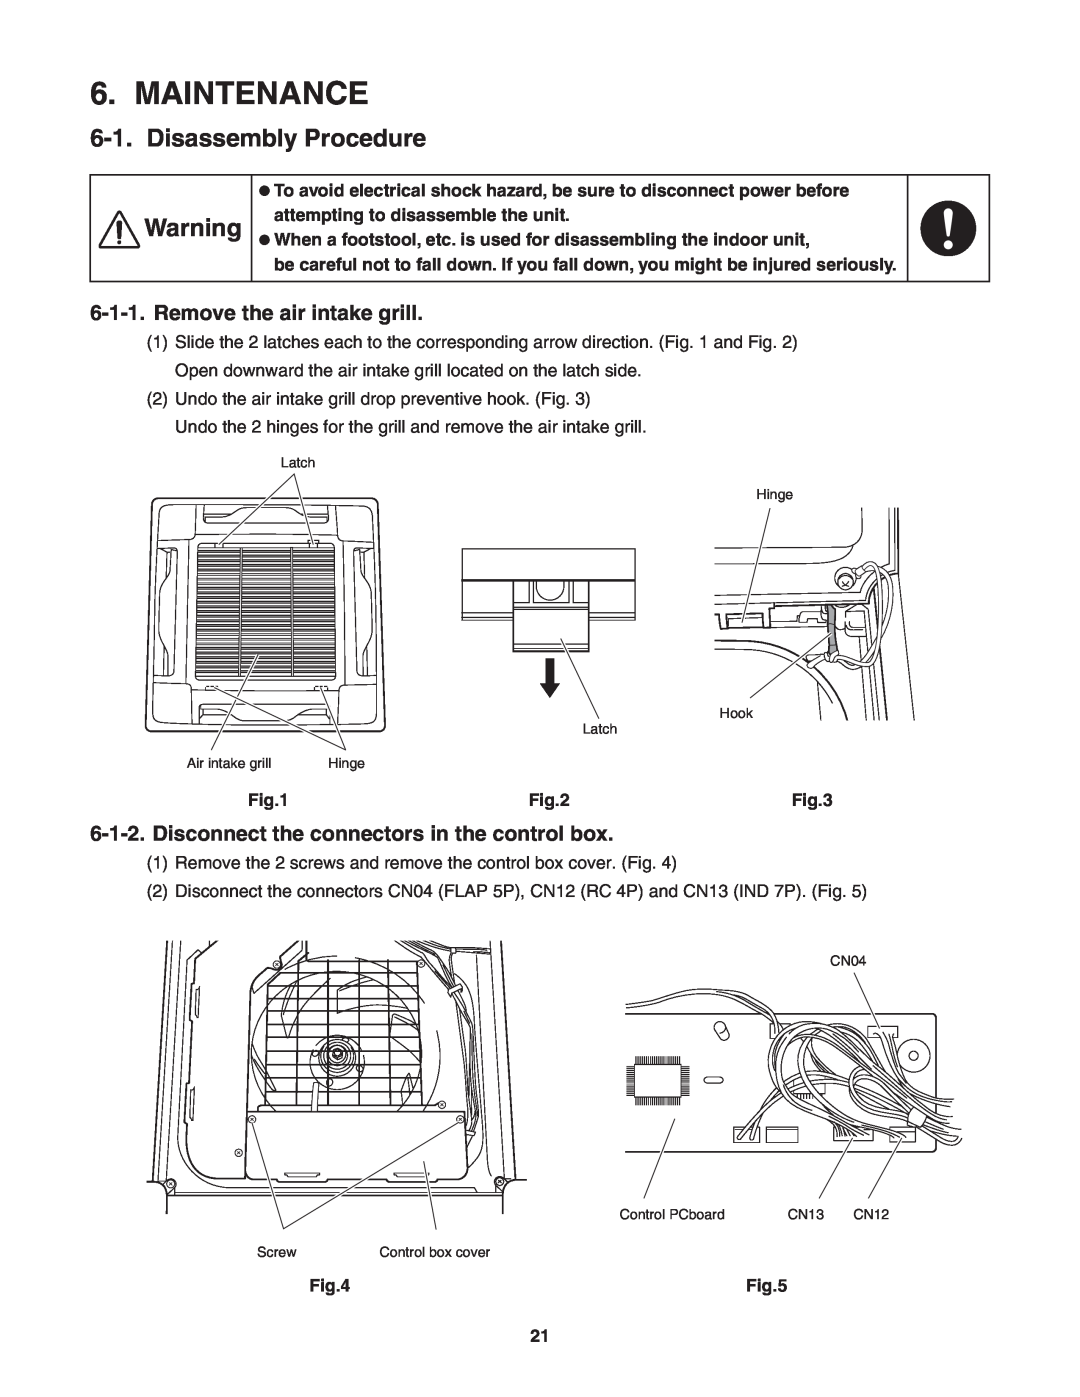 Panasonic R410A service manual Maintenance, Disassembly Procedure, Remove the air intake grill 